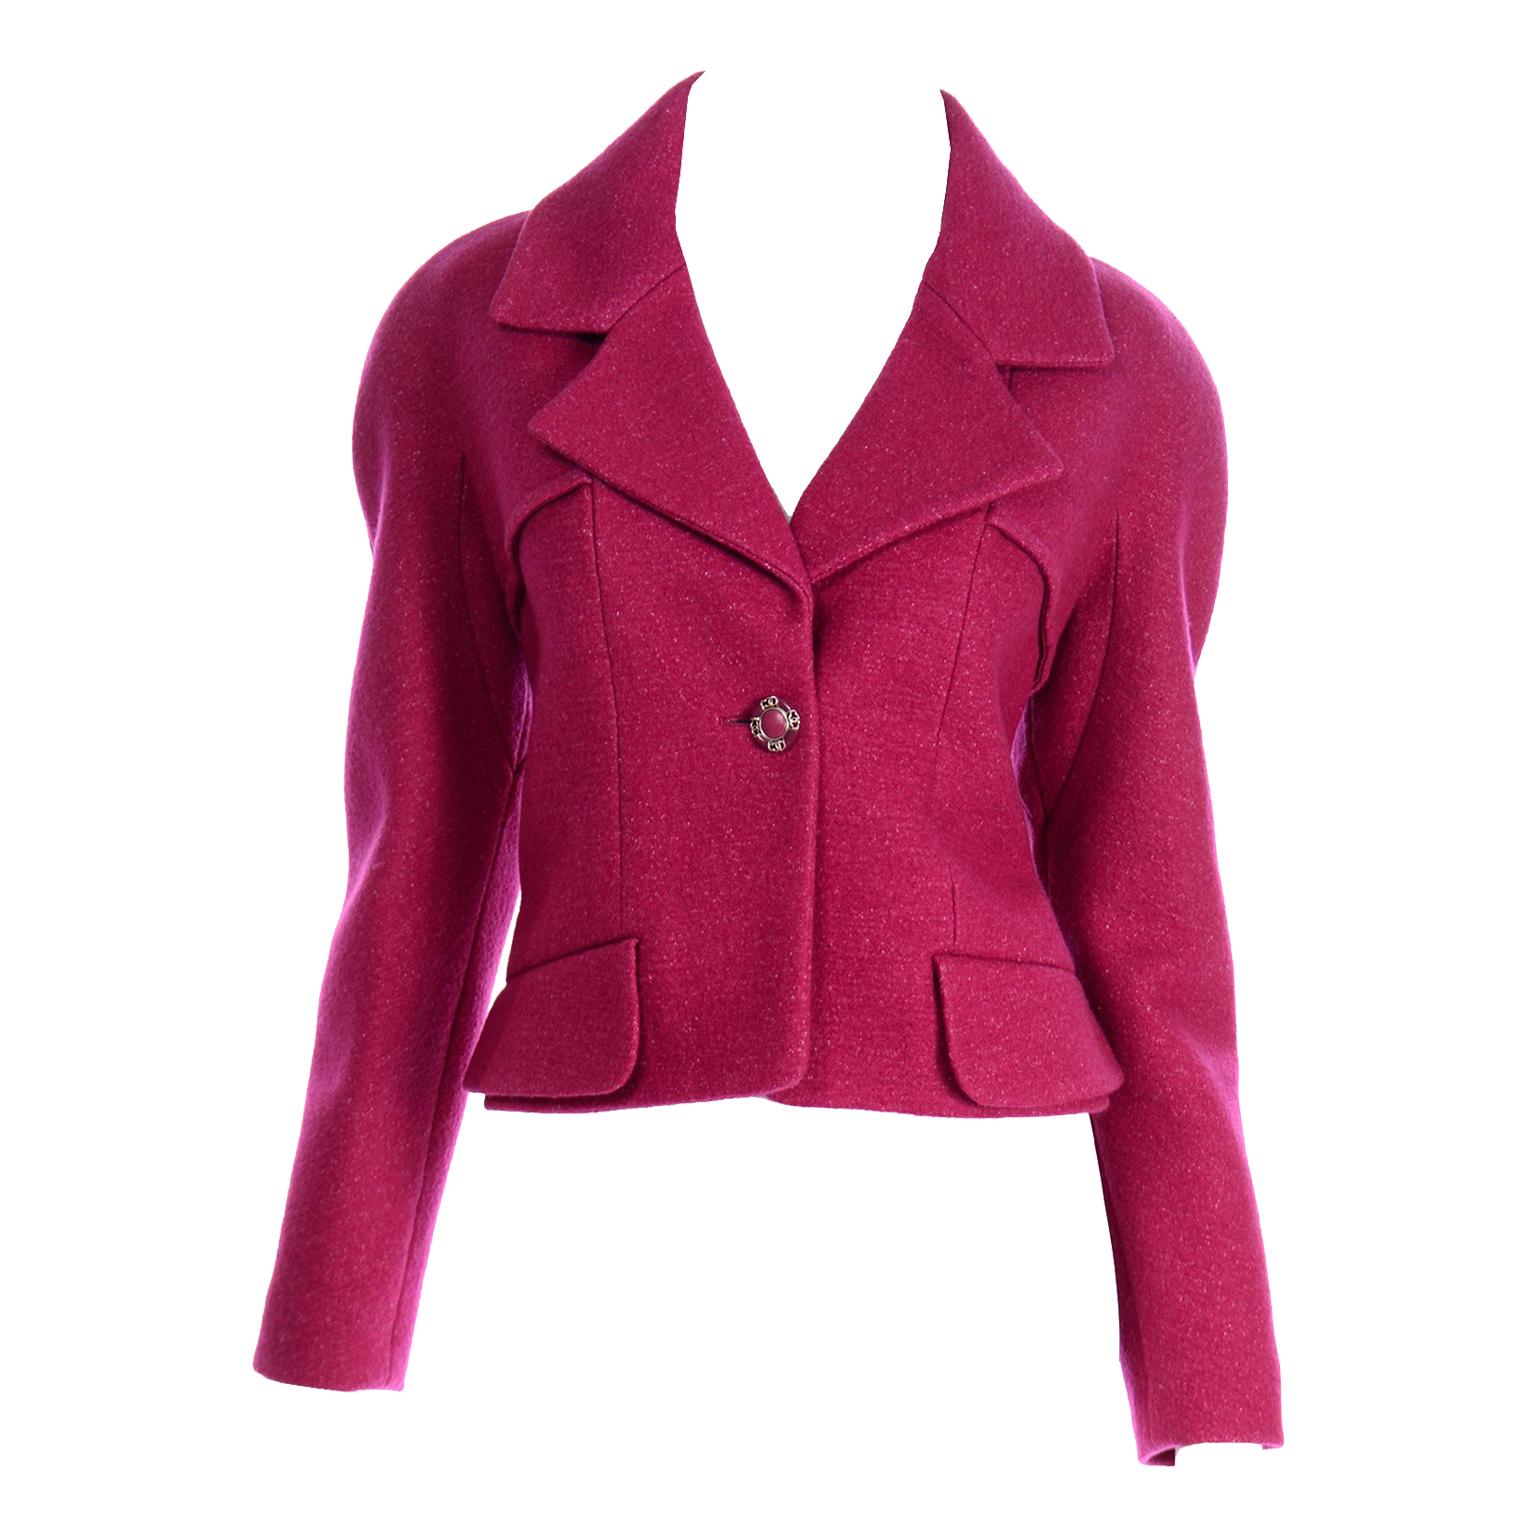 Chanel New With Tags 2018 Raspberry Pink Wool Blend Jacket